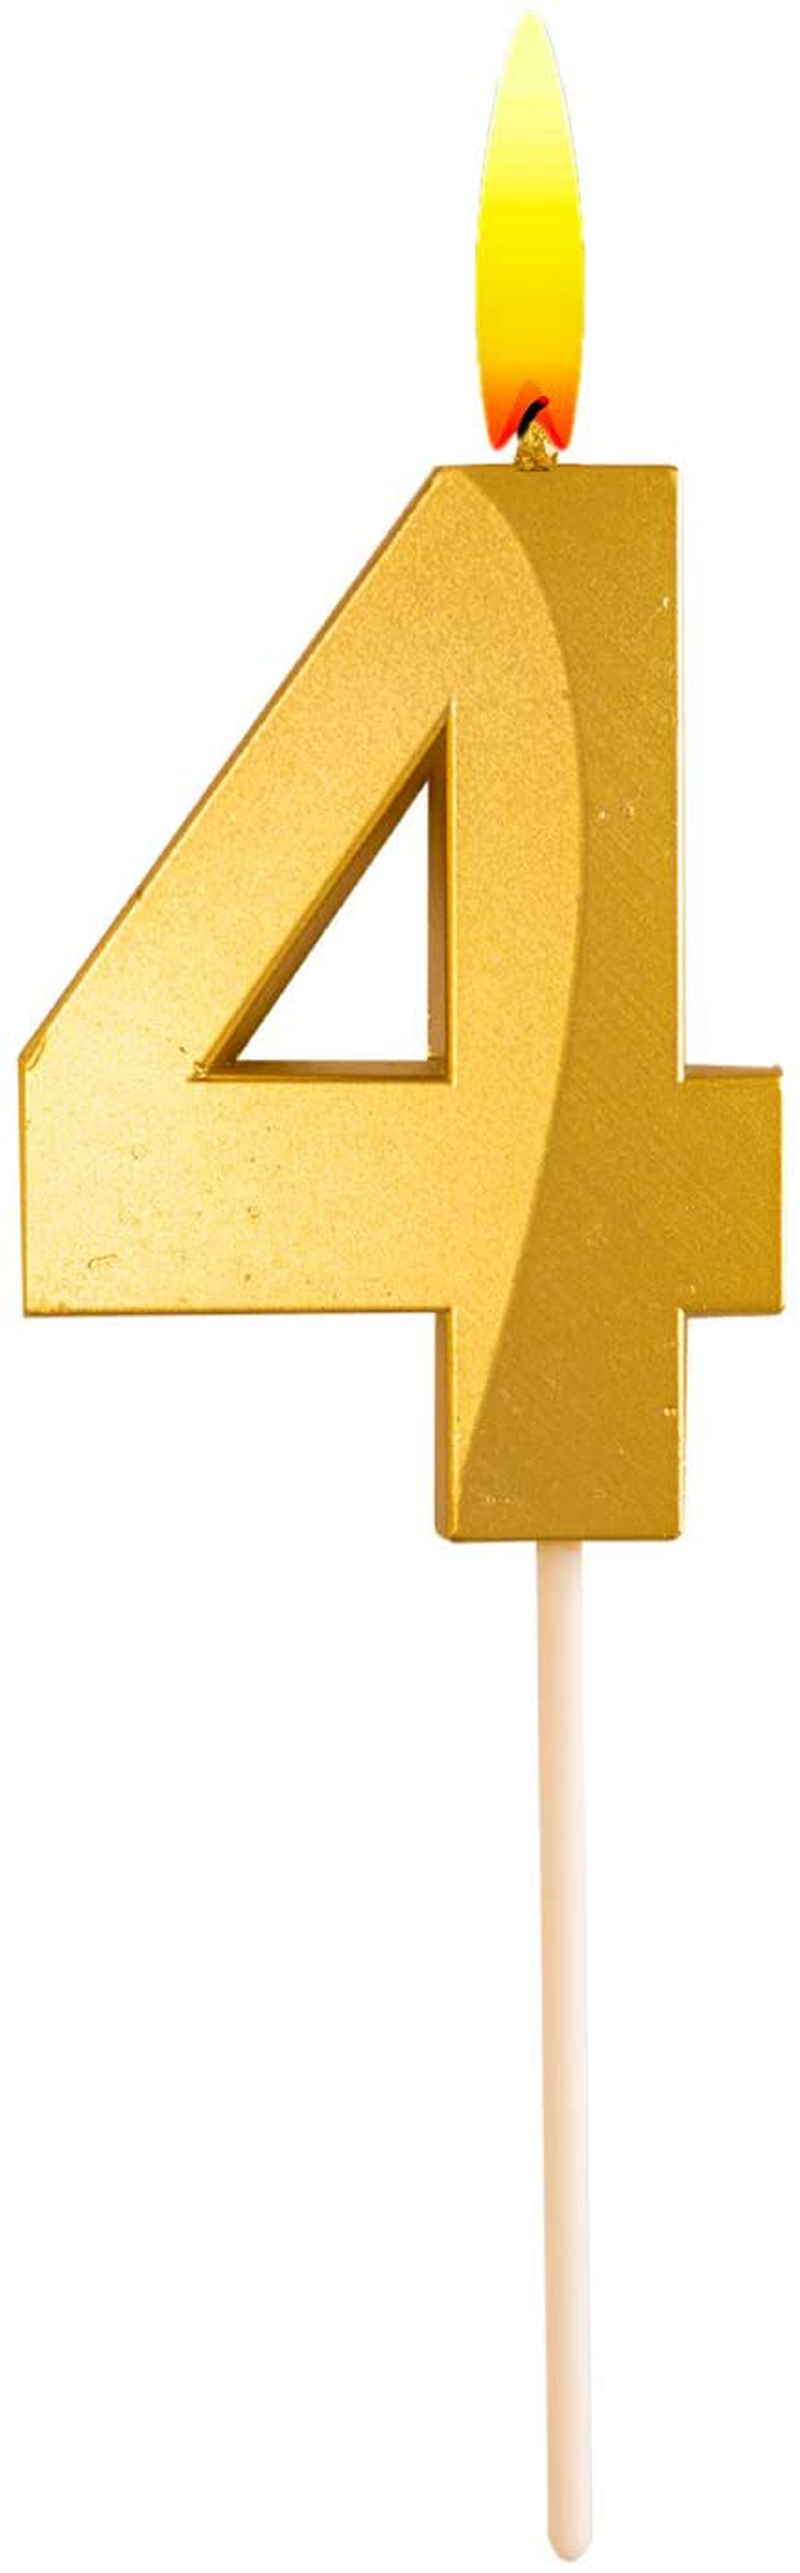 Gold Glitter Happy Birthday Cake Candles Number Candles Number 4 Birthday Candle 3D Design Cake Topper Decoration for Party Kids Adults